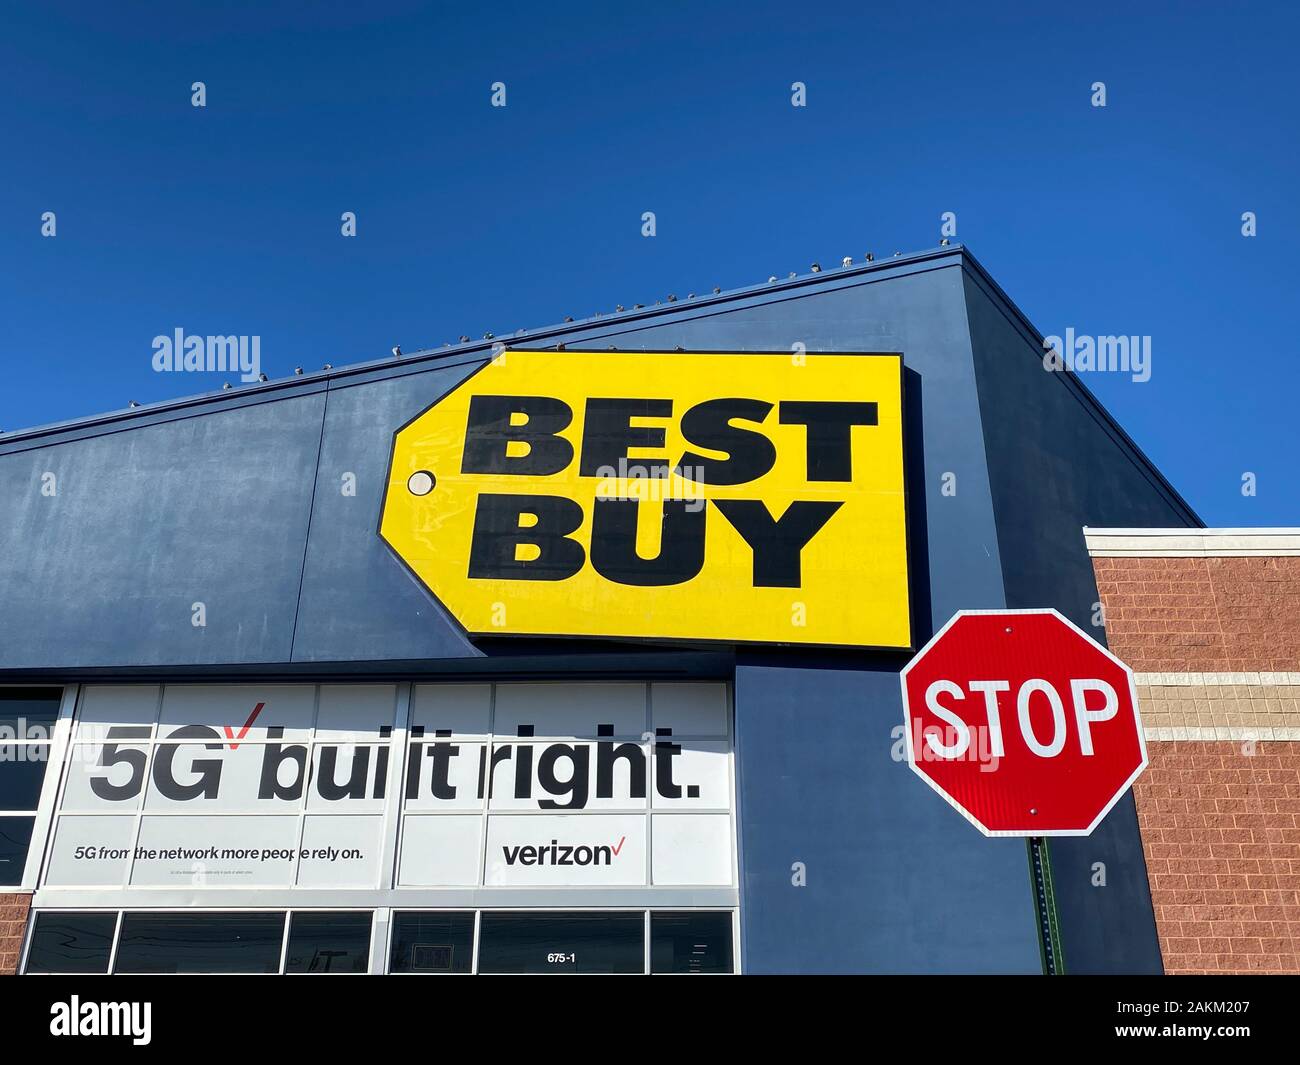 ISELIN, NEW JERSEY / UNITED STATES - January 9, 2020: A view of the Best Buy sign on Route 1 taken on a crisp winter day Stock Photo